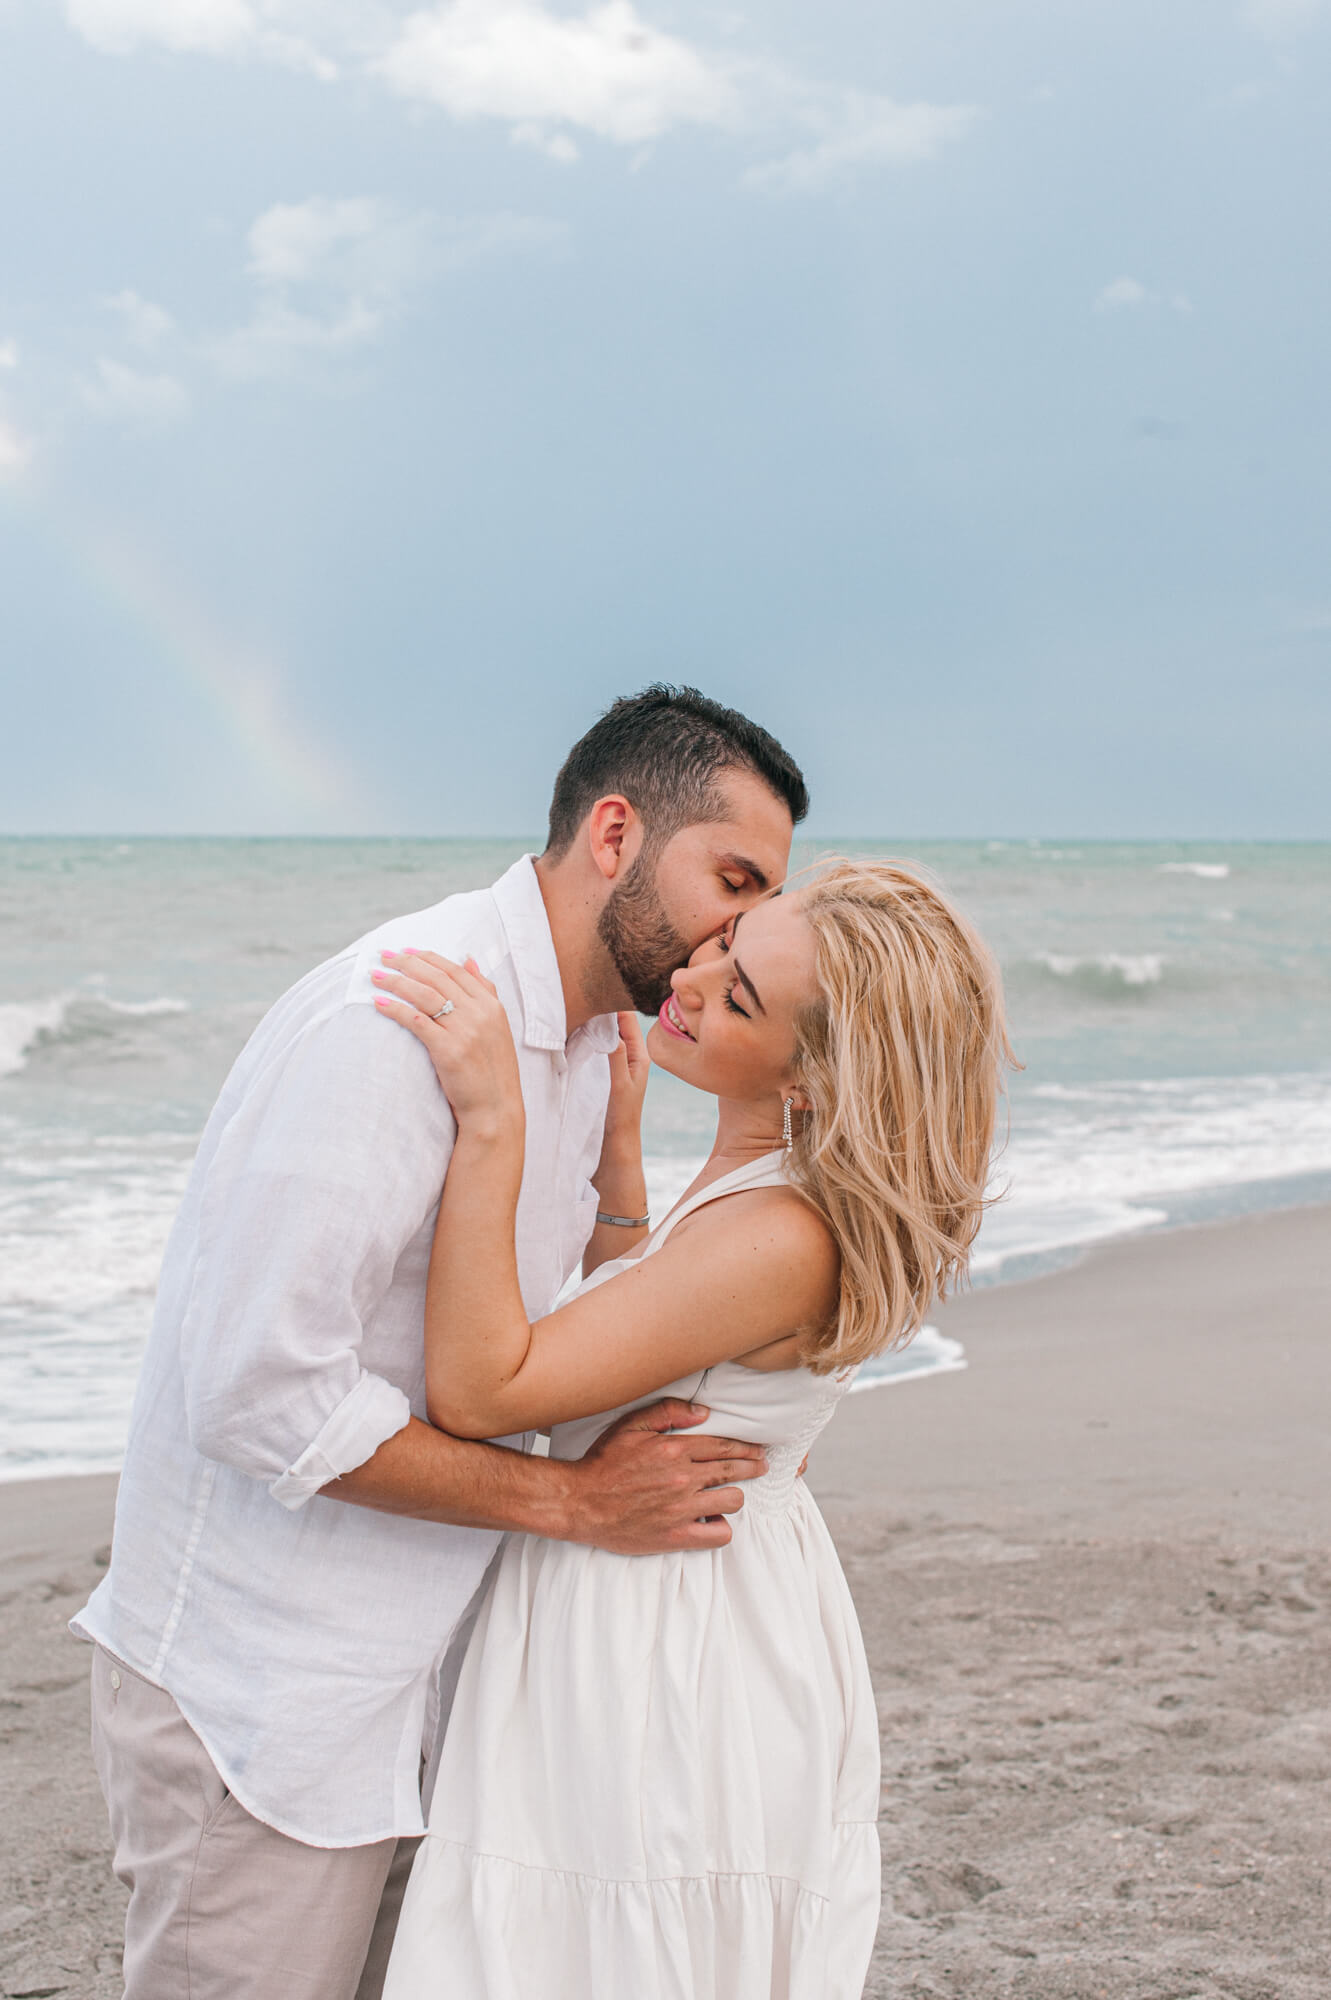 Man kissing his fiance on the cheek near the water line of the beach with a rainbow in the background over the water